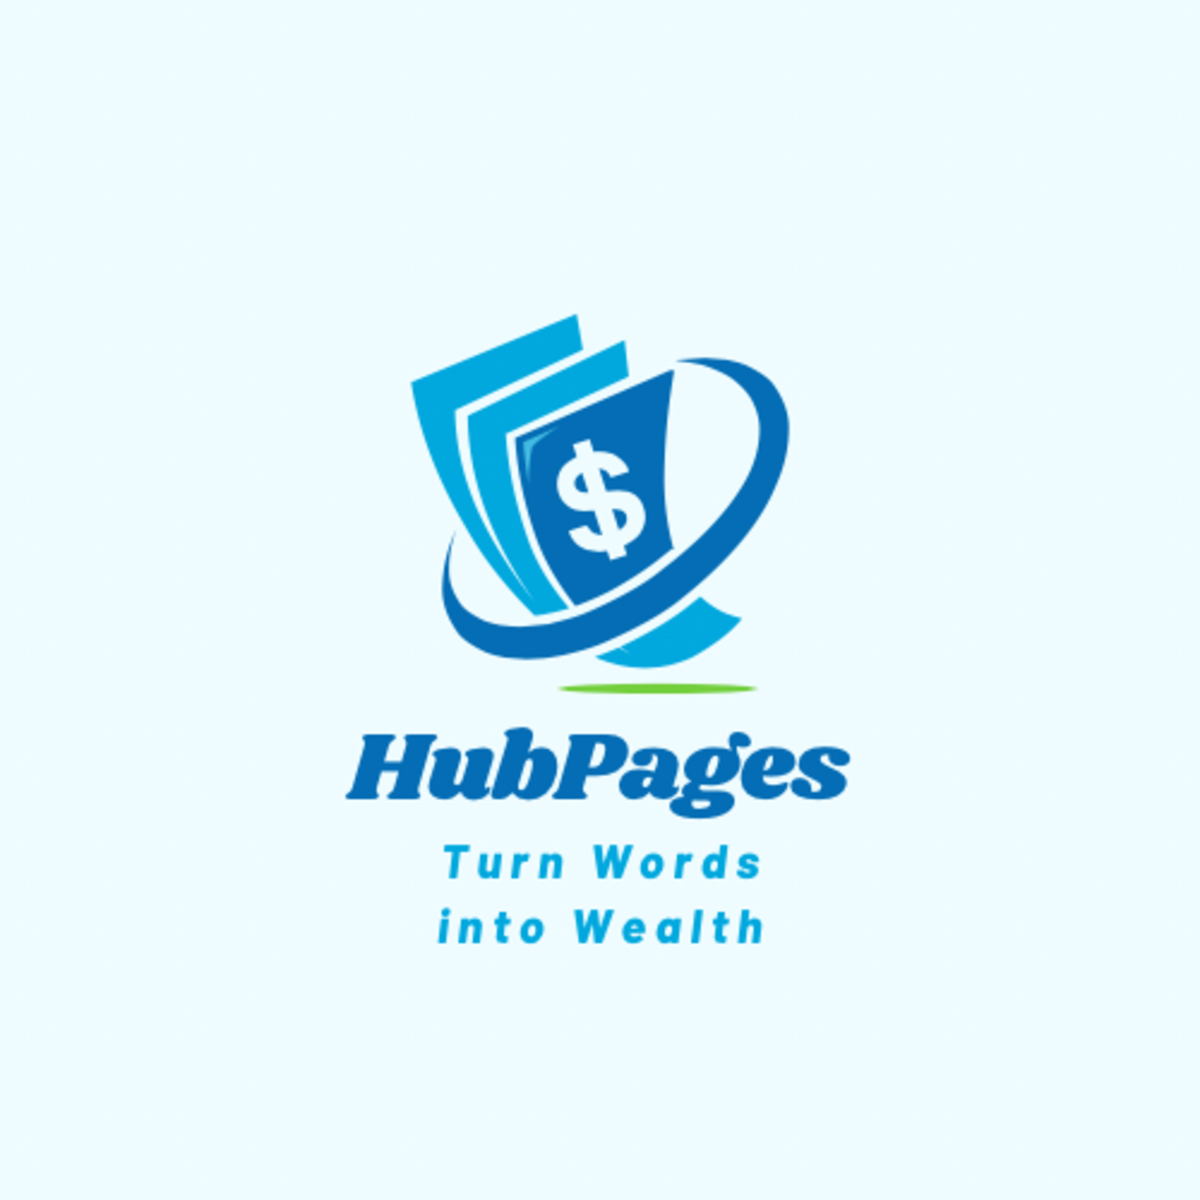 Hubpages Hustle: Turn Words into Wealth Today